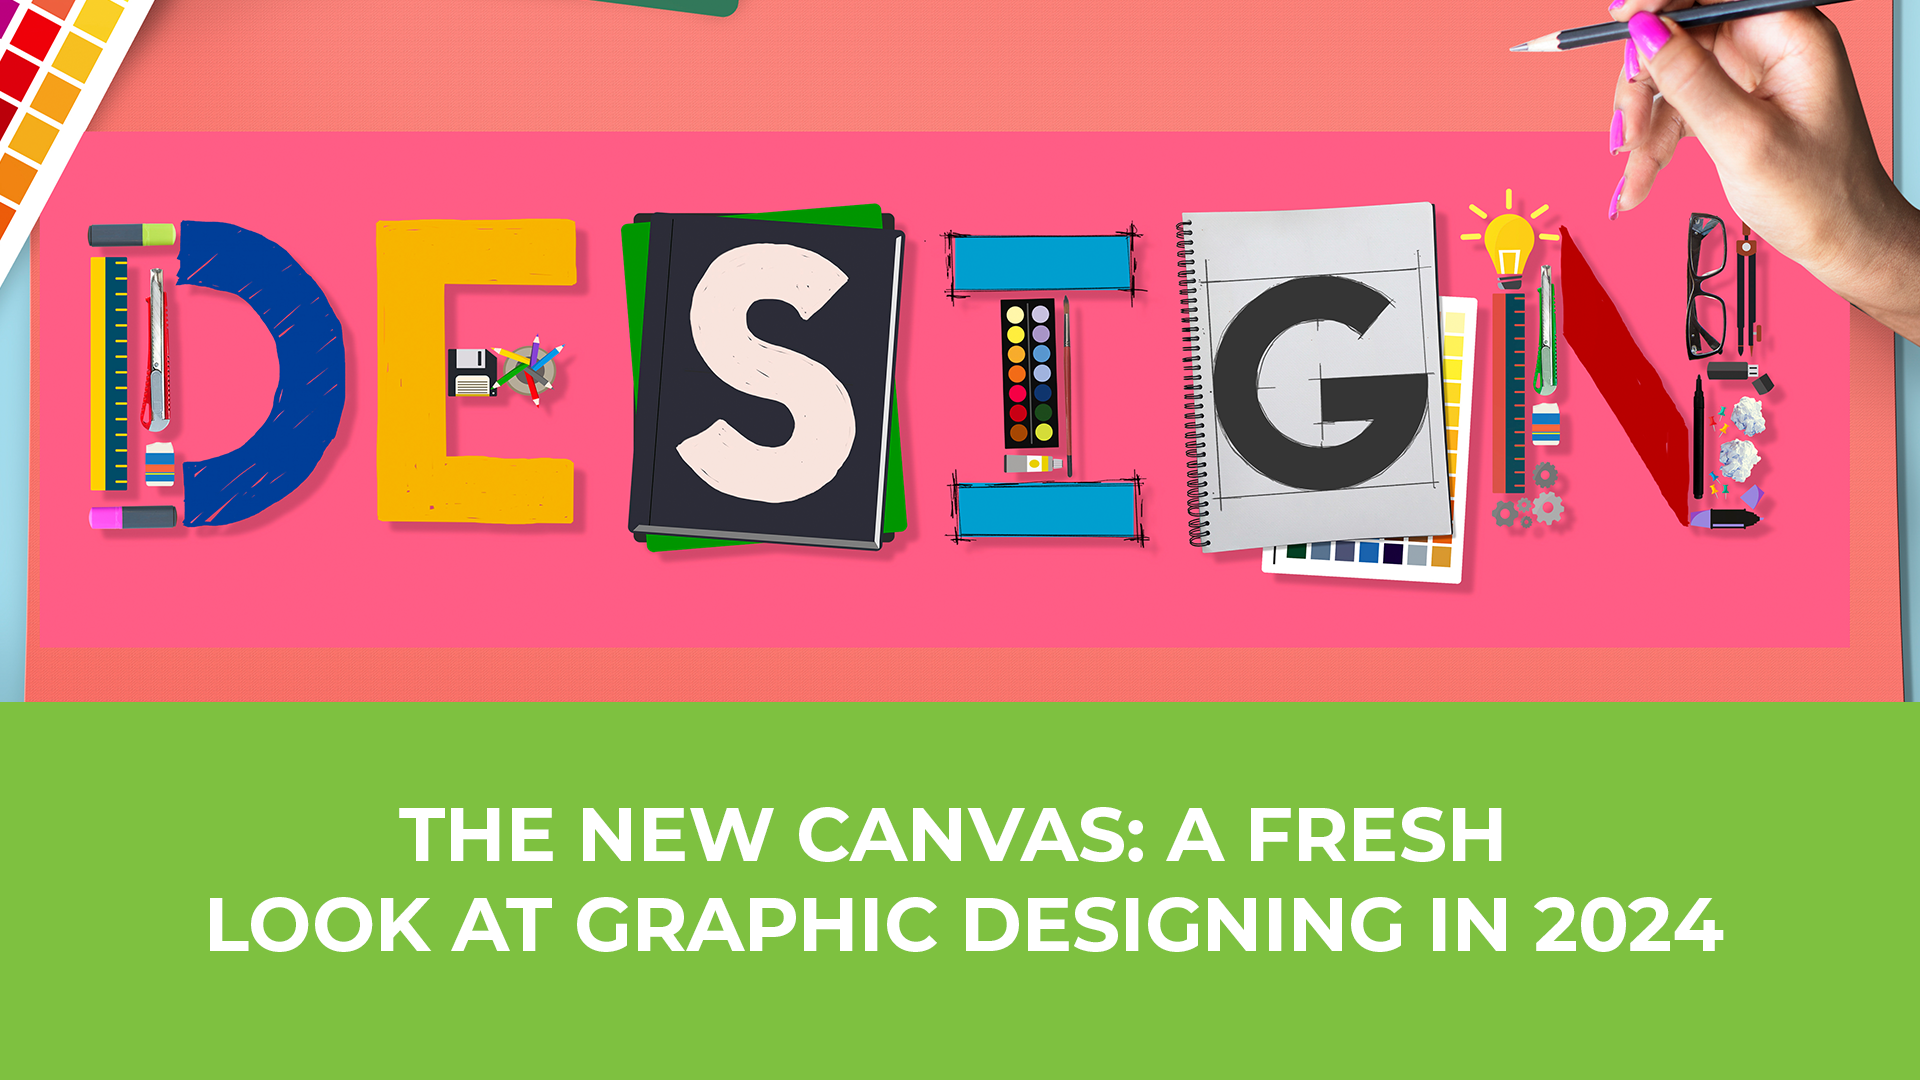 THE NEW CANVAS: A FRESH LOOK AT GRAPHIC DESIGNING IN 2024